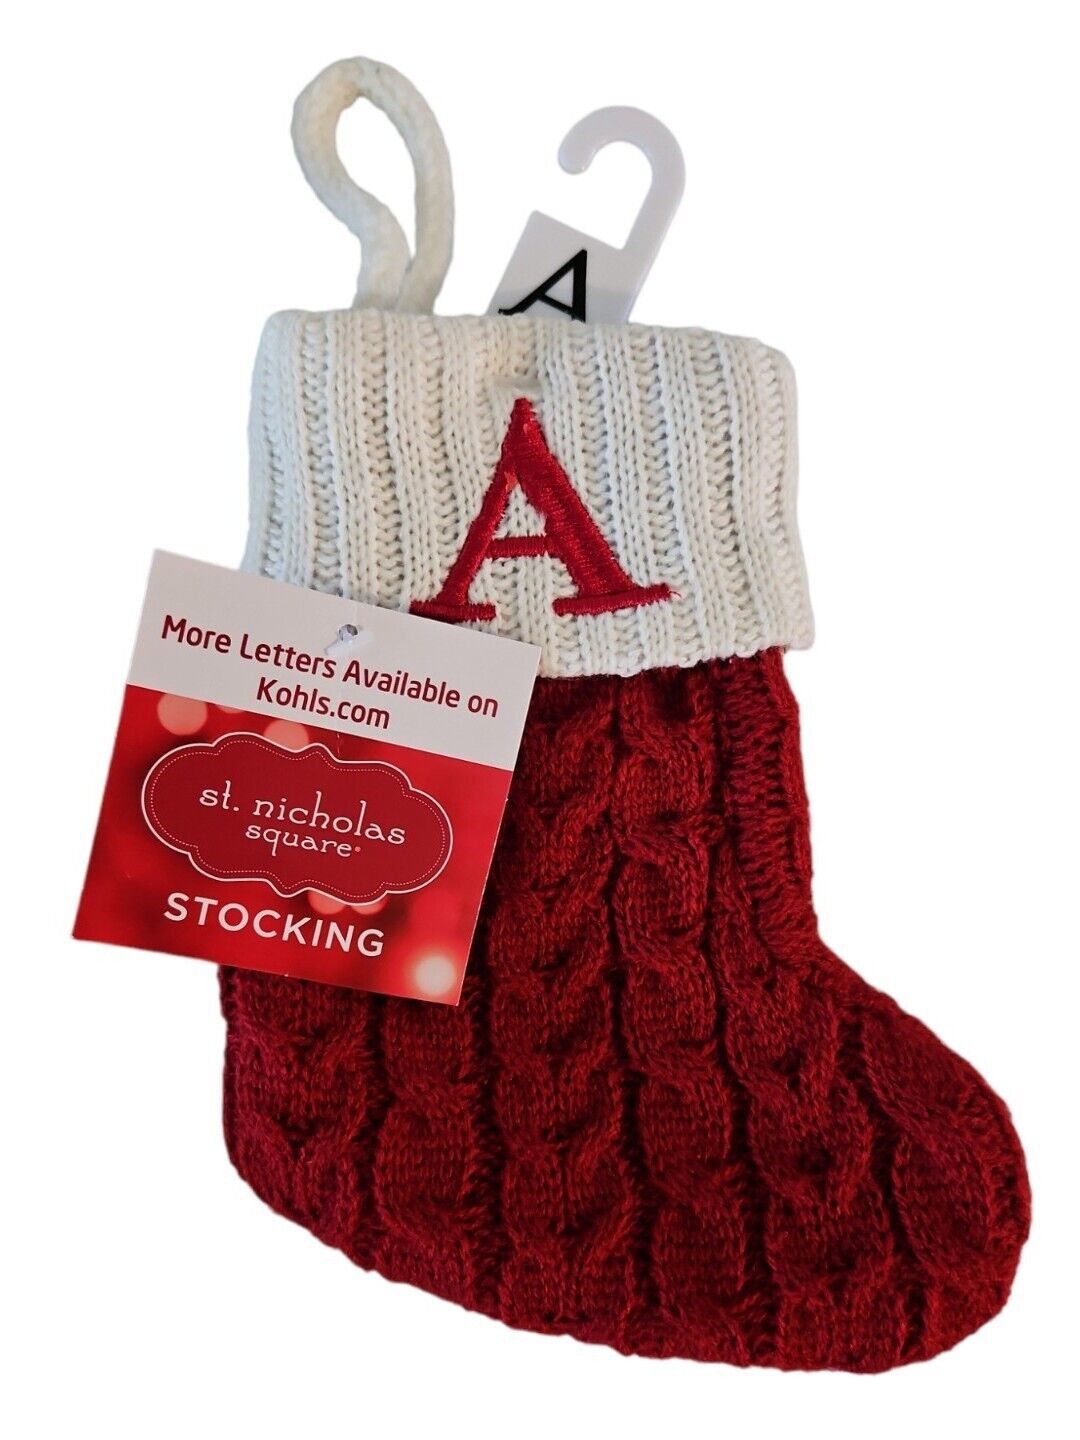 Red Cable Knit Christmas Stocking   -  ST. NICHOLAS SQUARE 7\